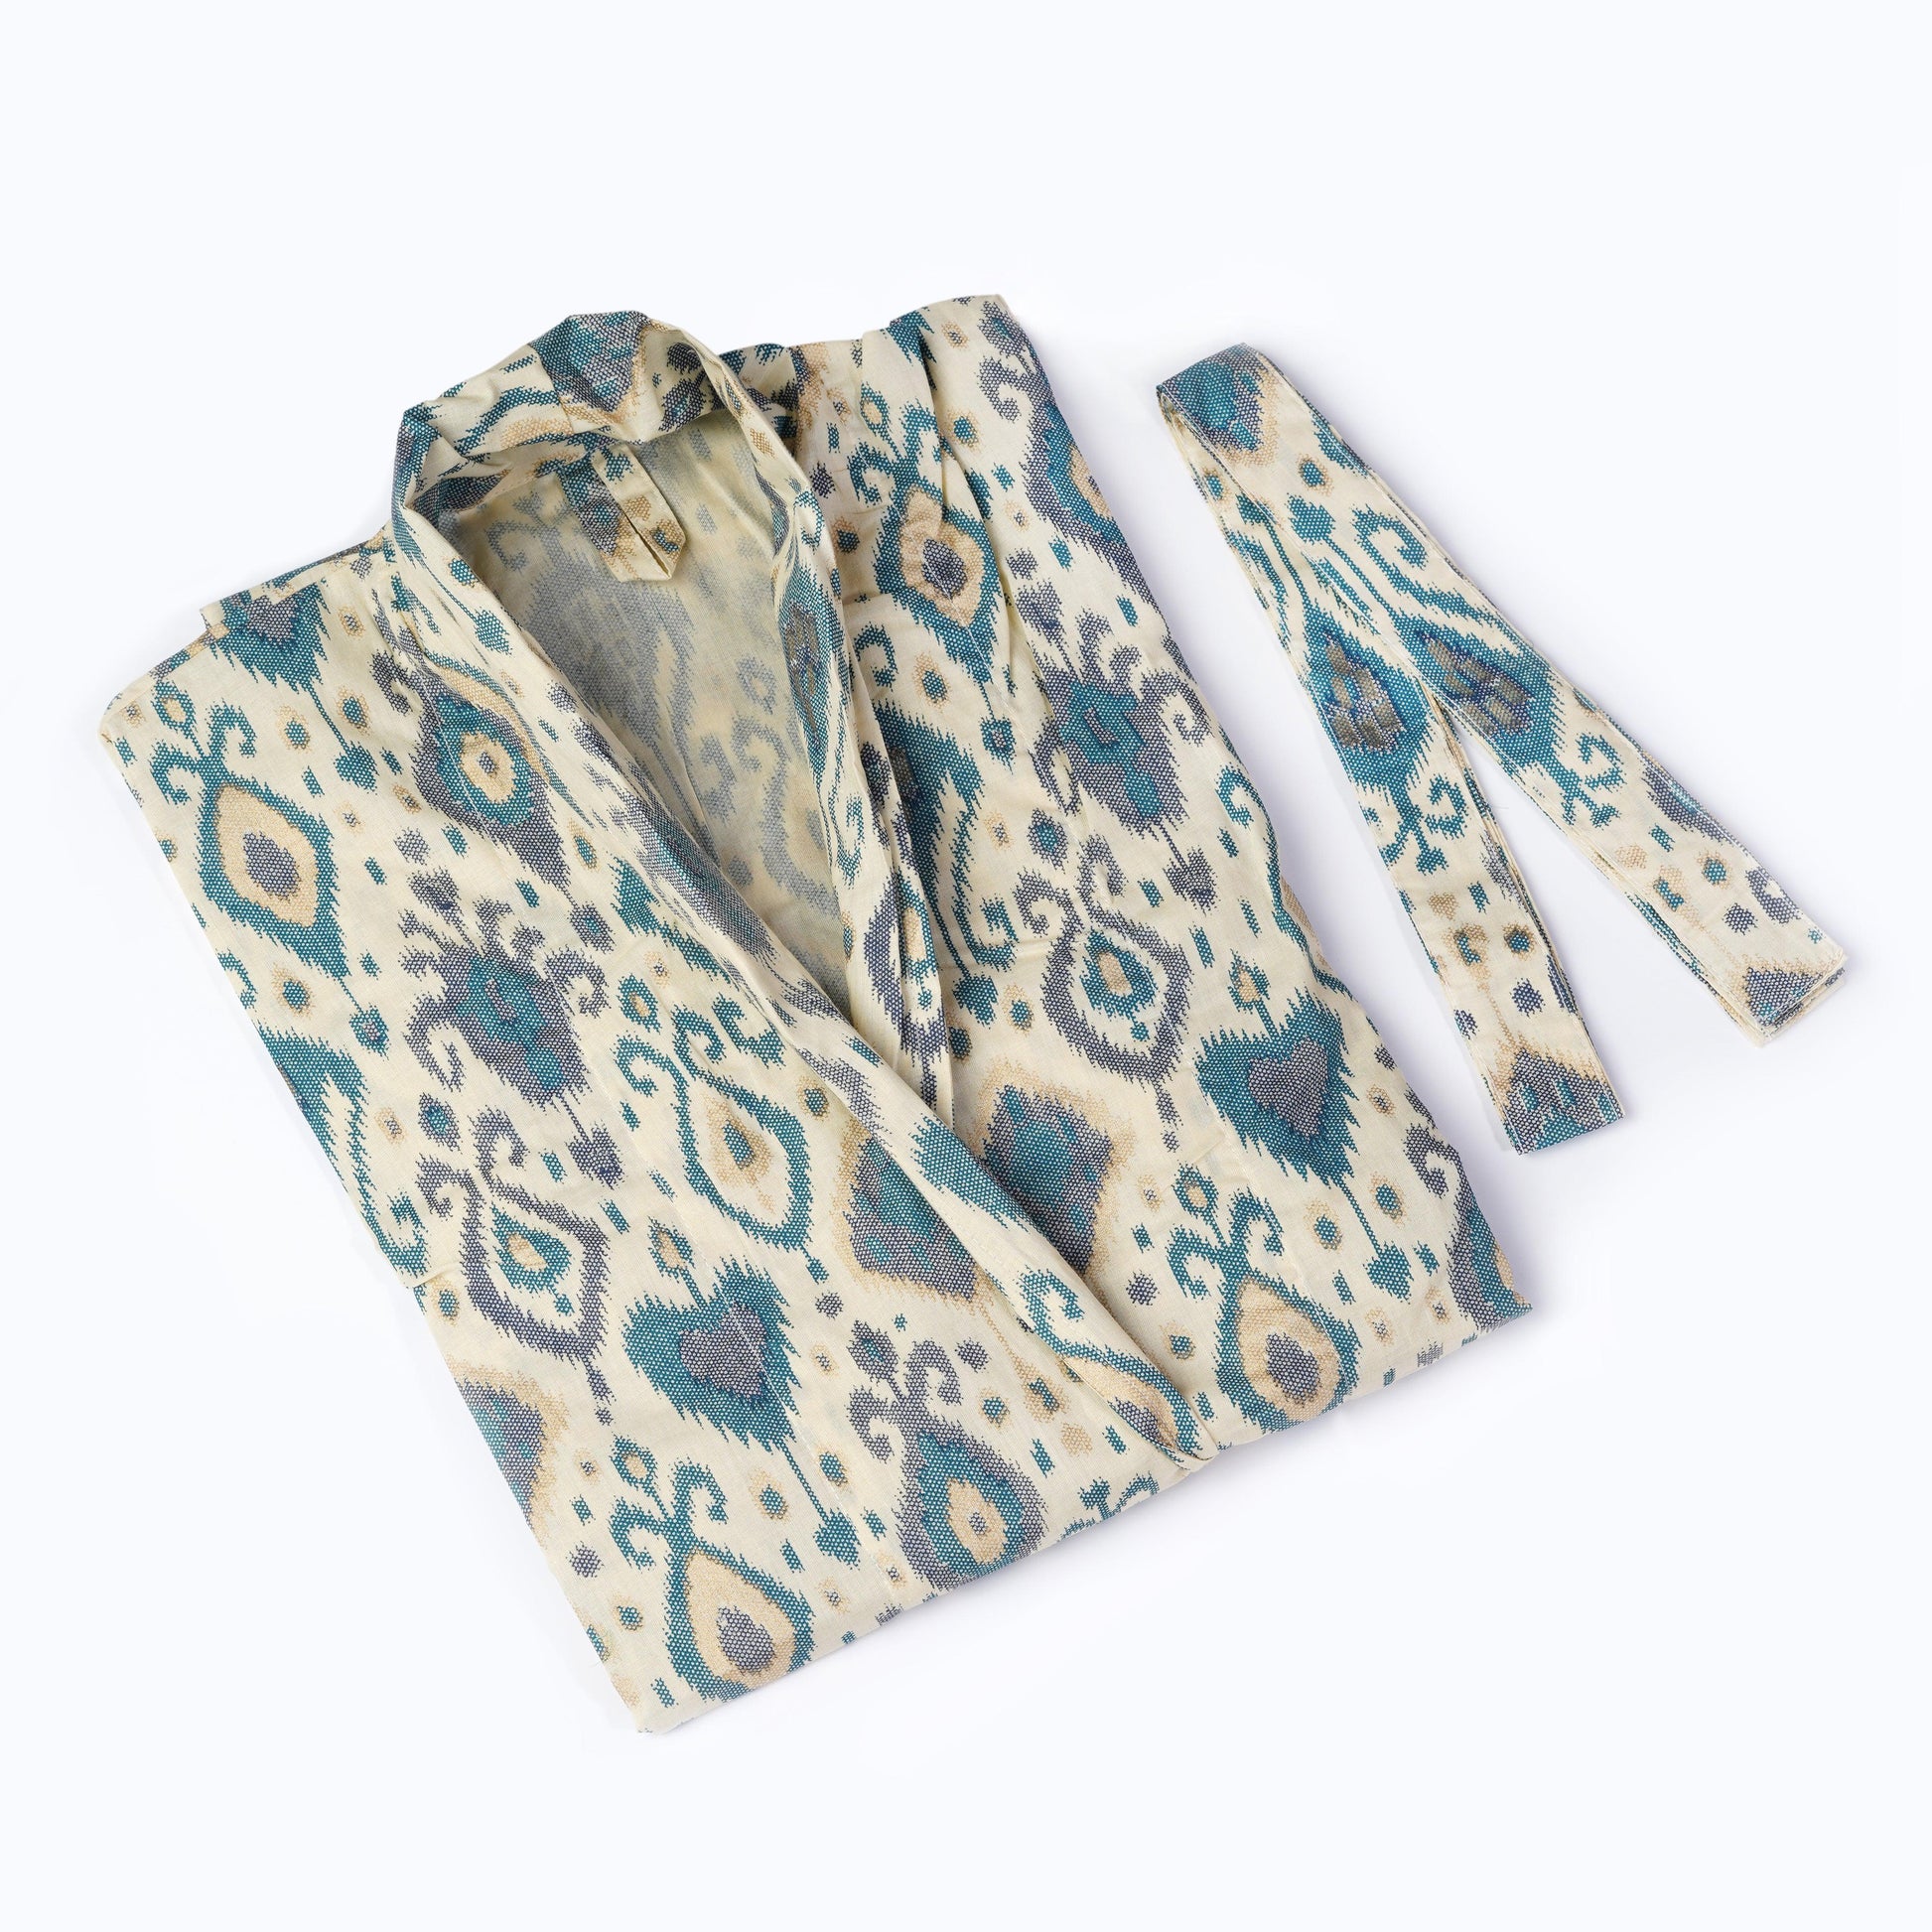 Kimono Bath Robes/ Night Suit -DS13 - The Teal Thread